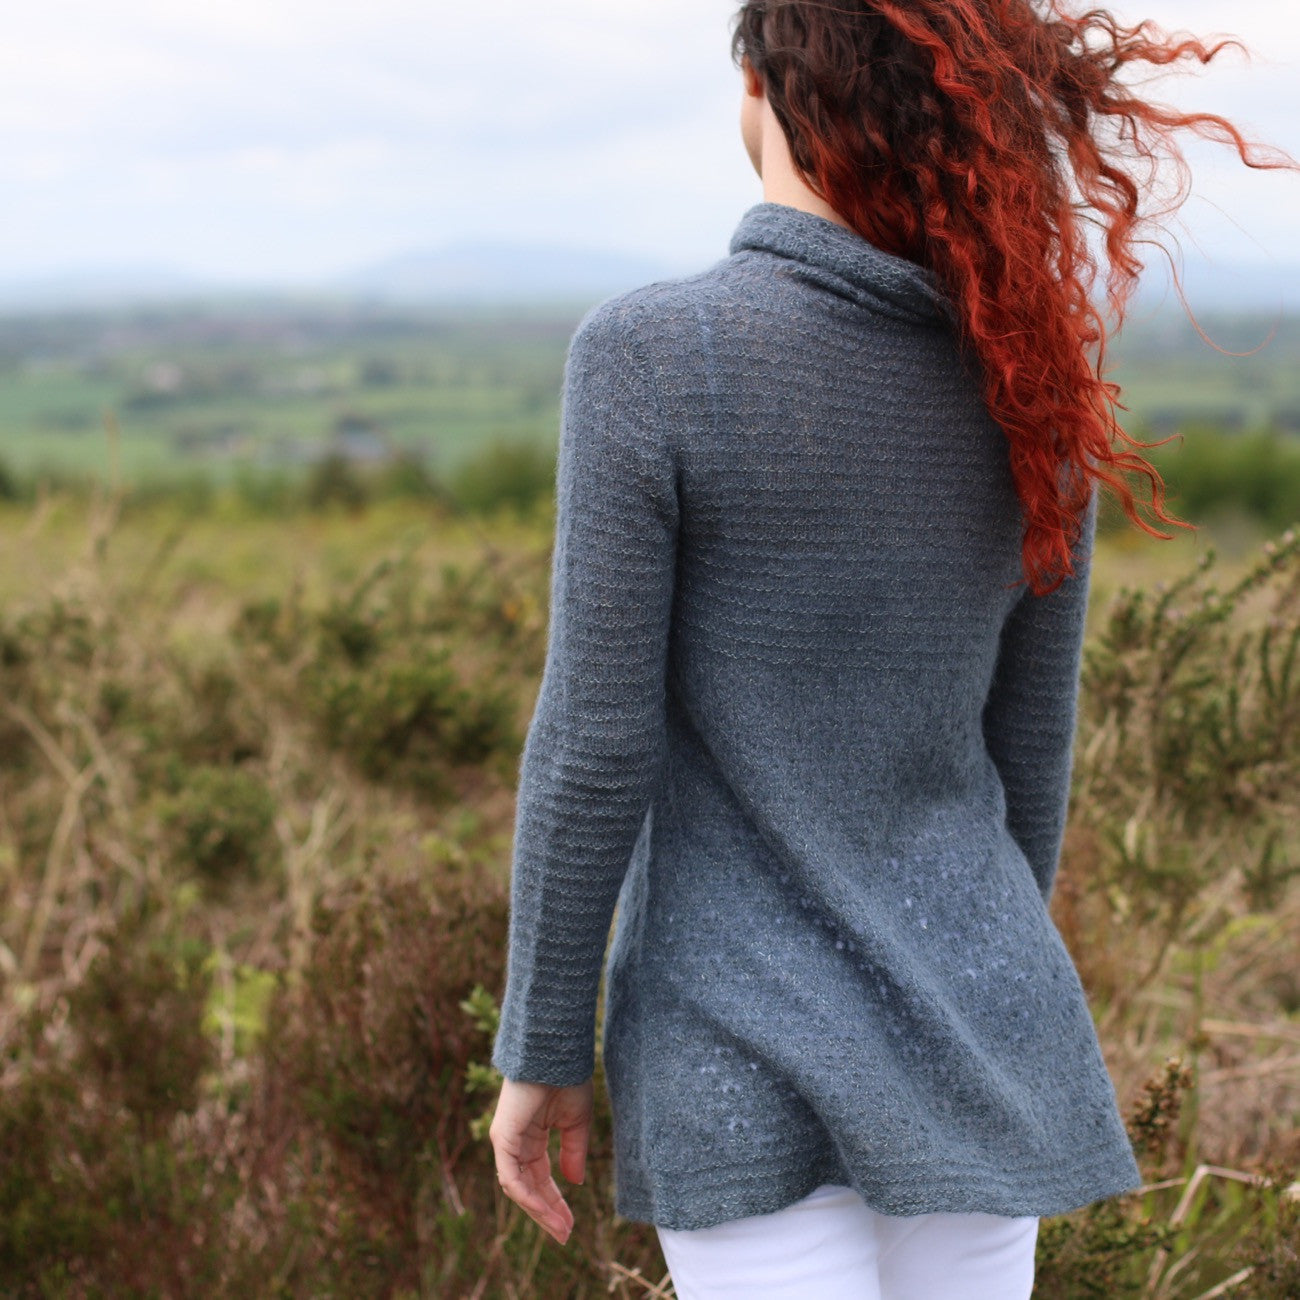 Mithral Sweater Pattern